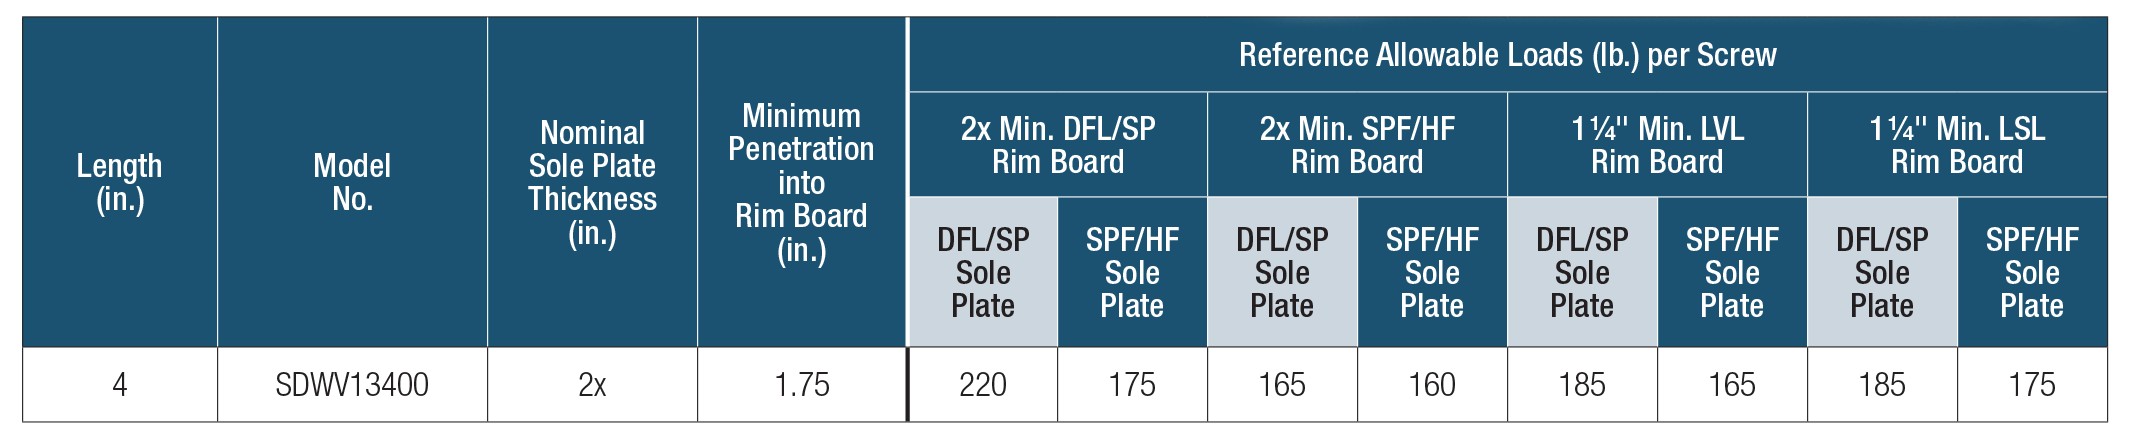 SDWV Allowable Shear Loads for Sole-to-Rim Connection